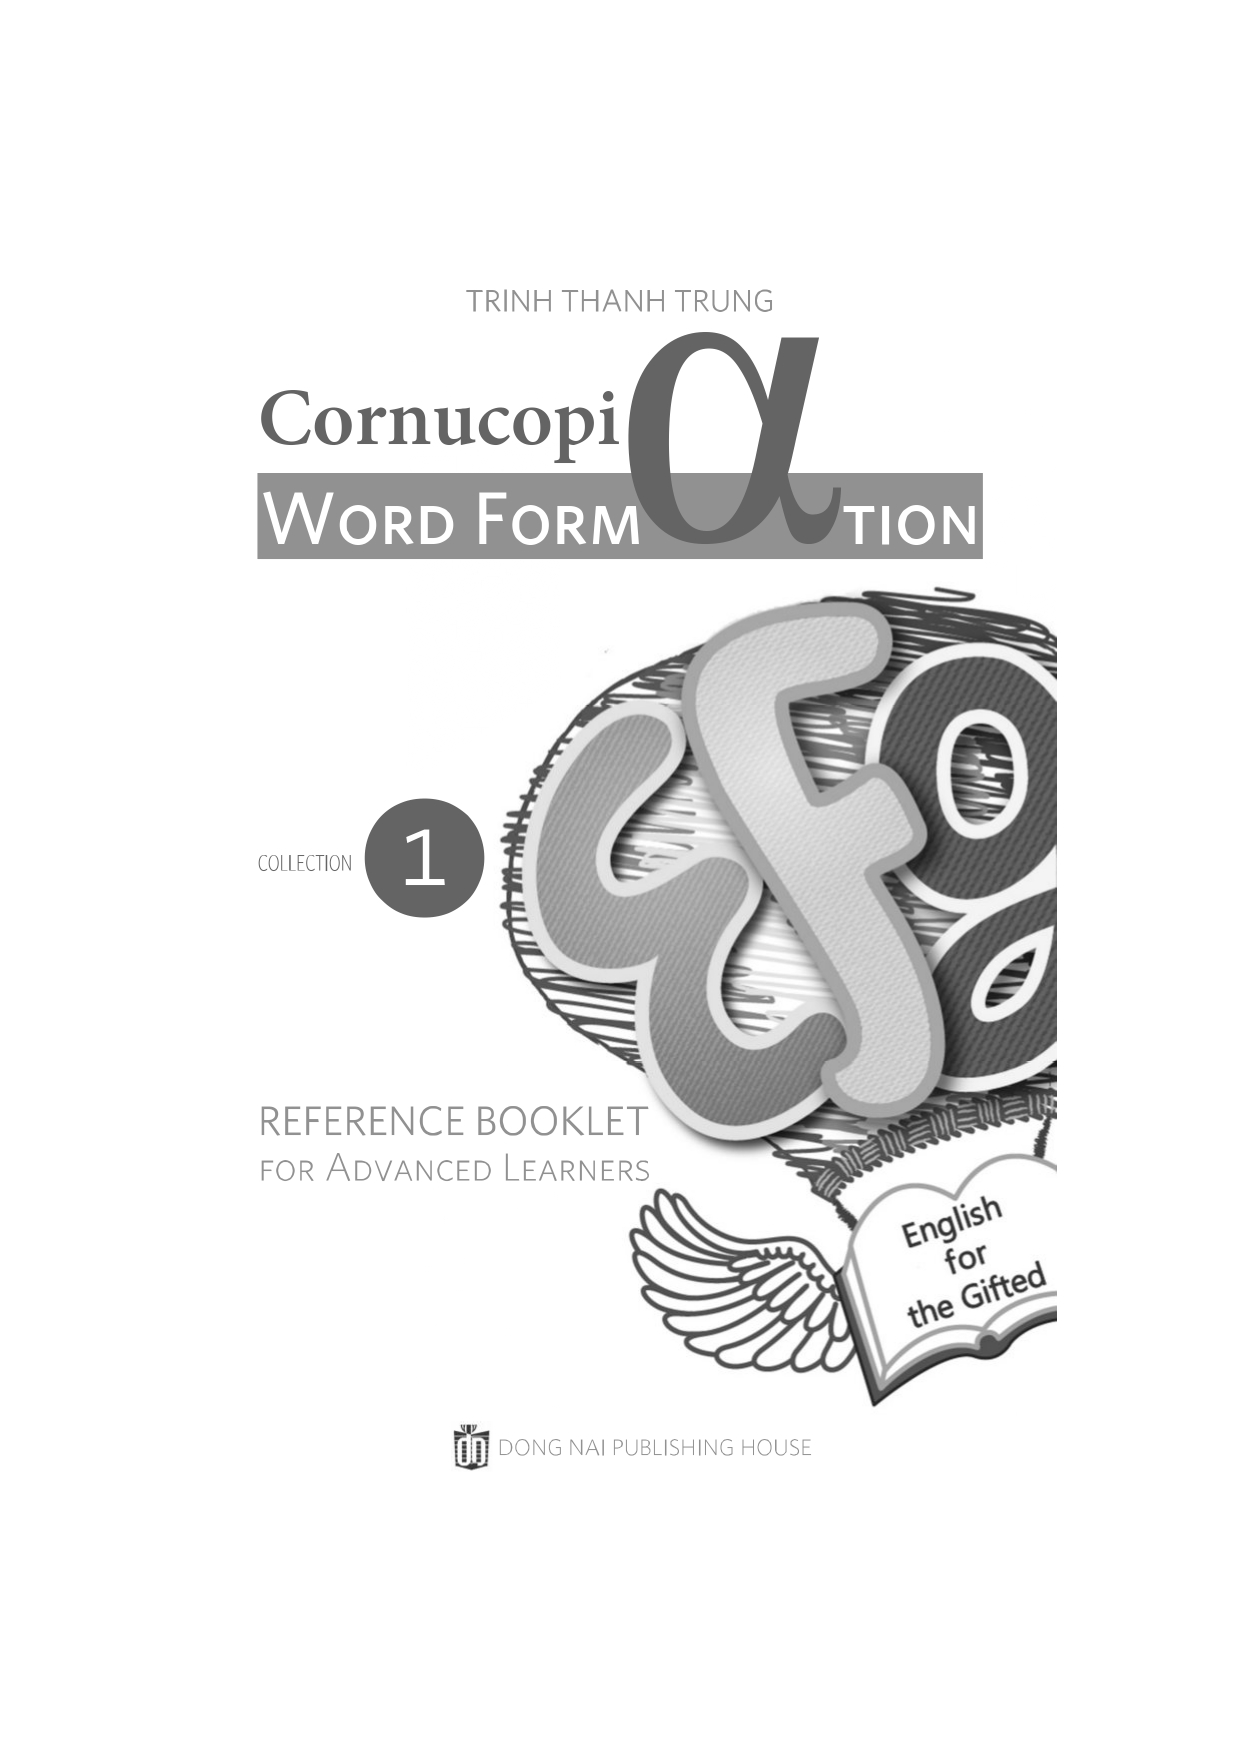 [tailieudieuky.com] (Trinh Thanh Tung) Cornucopia Word Formation Collection 1 (Reference booklet for Advanced Learners) - English for gifted (62 pages)_page-0002